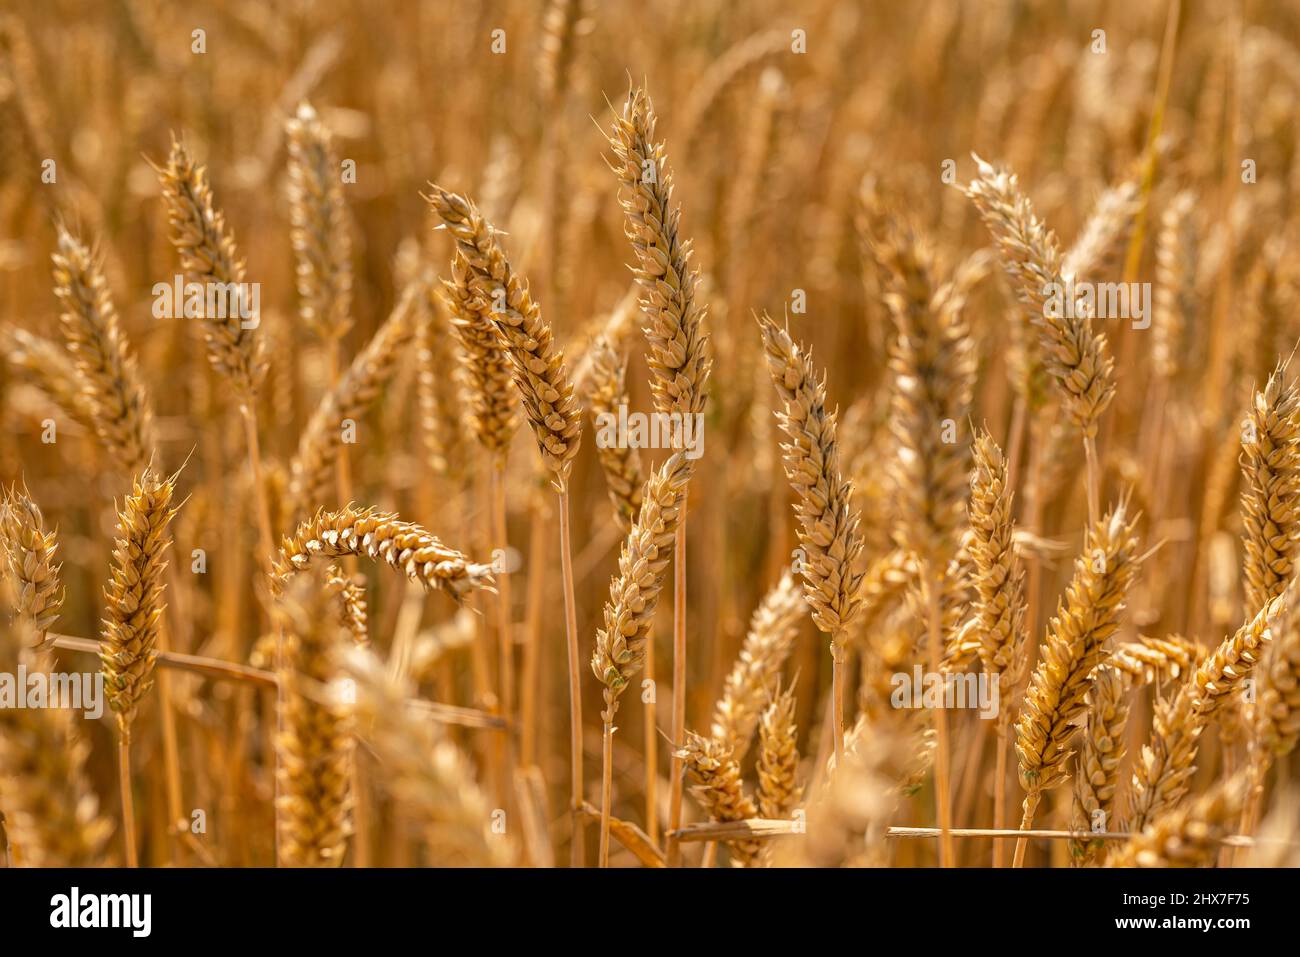 Full frame image of a golden wheat field in summer. Common wheat (Triticum aestivum) is the most economically important type of wheat. Stock Photo